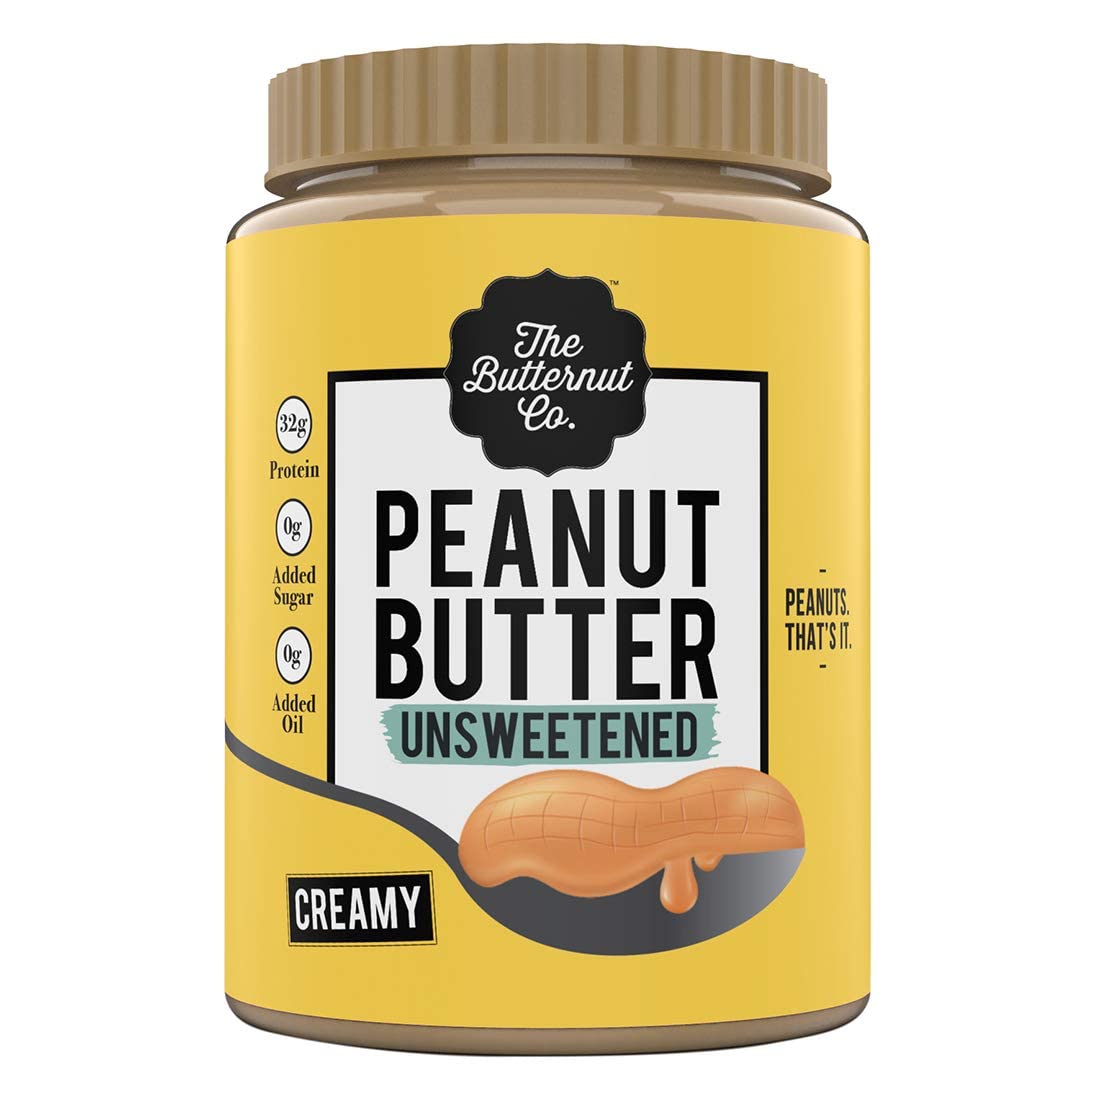 The Butternut Co. Natural Peanut Butter (Creamy) 1kg | PACK OF 8 | Unsweetened | 32g Protein | No Added Sugar | 100% Peanuts | No Salt | High Protein Peanut Butter | Vegan